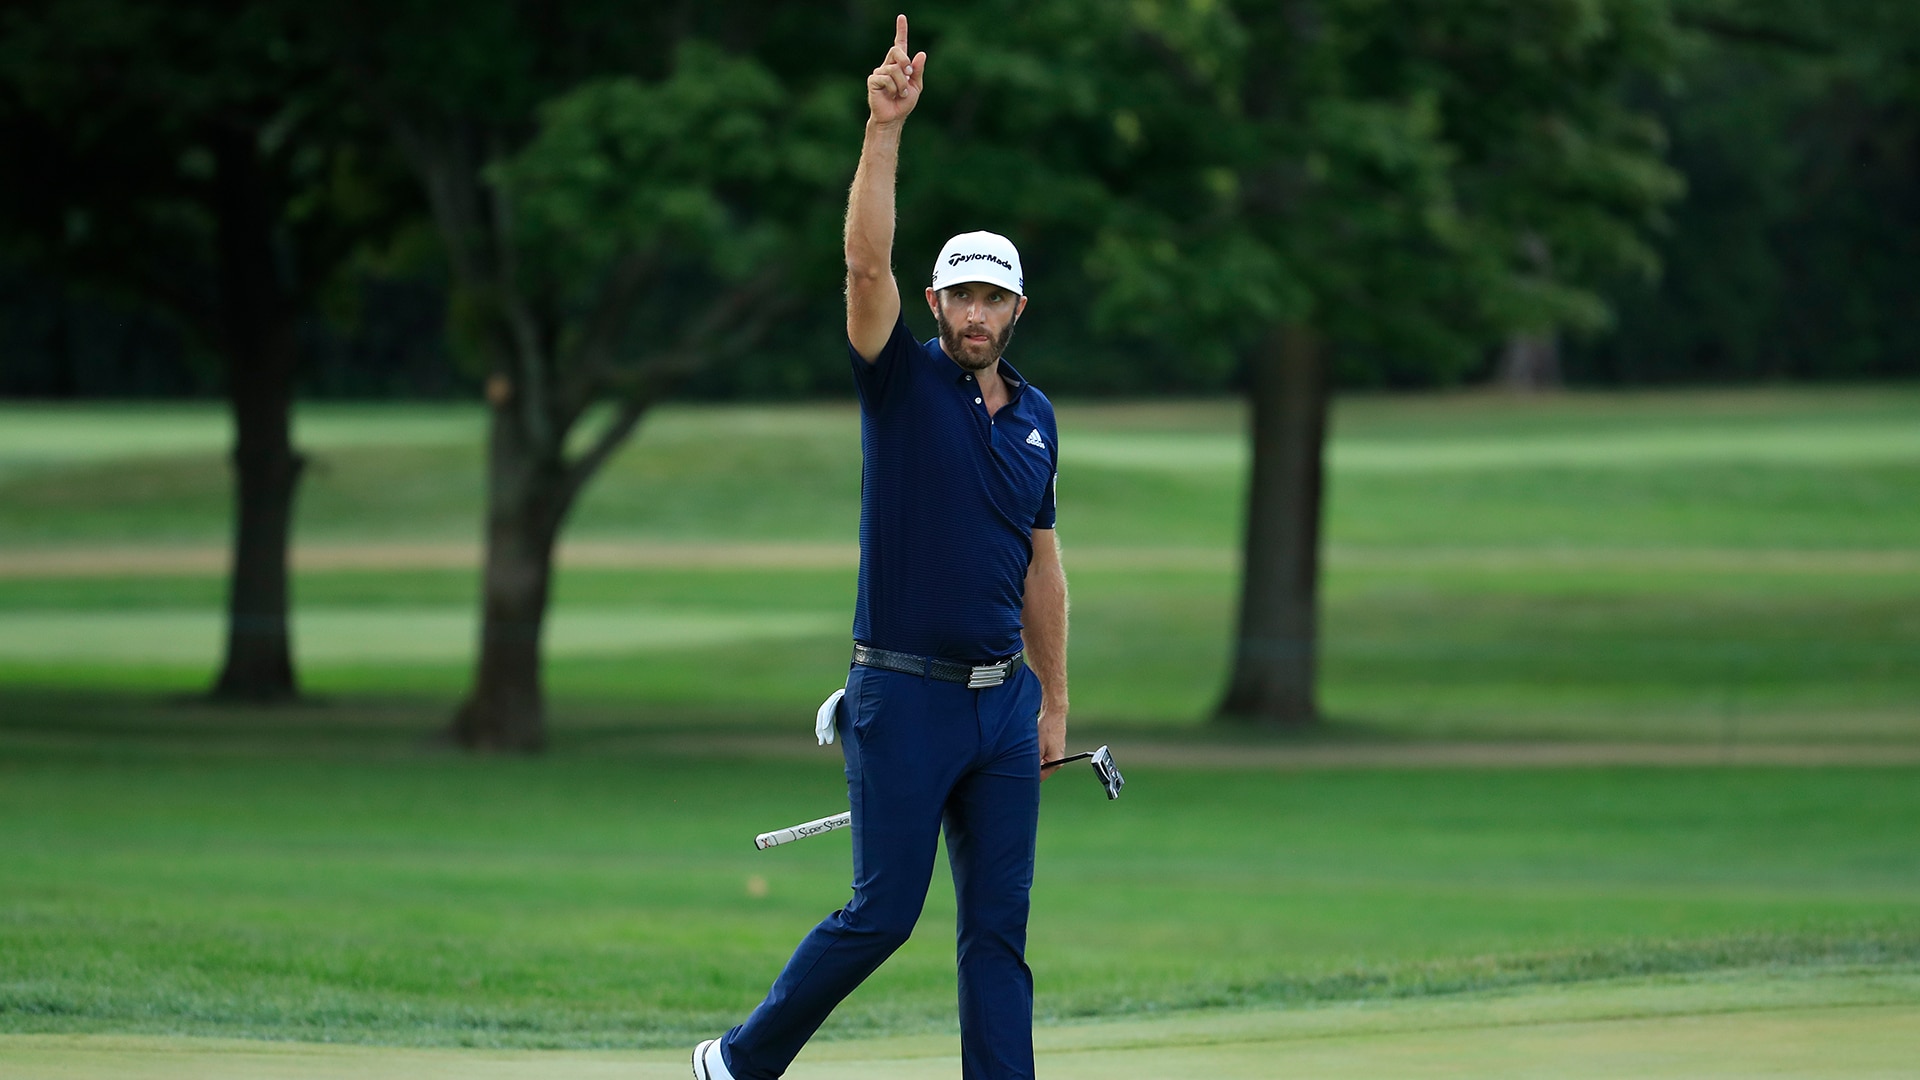 Dustin Johnson runner-up at BMW, but still No. 1 entering FedExCup finale